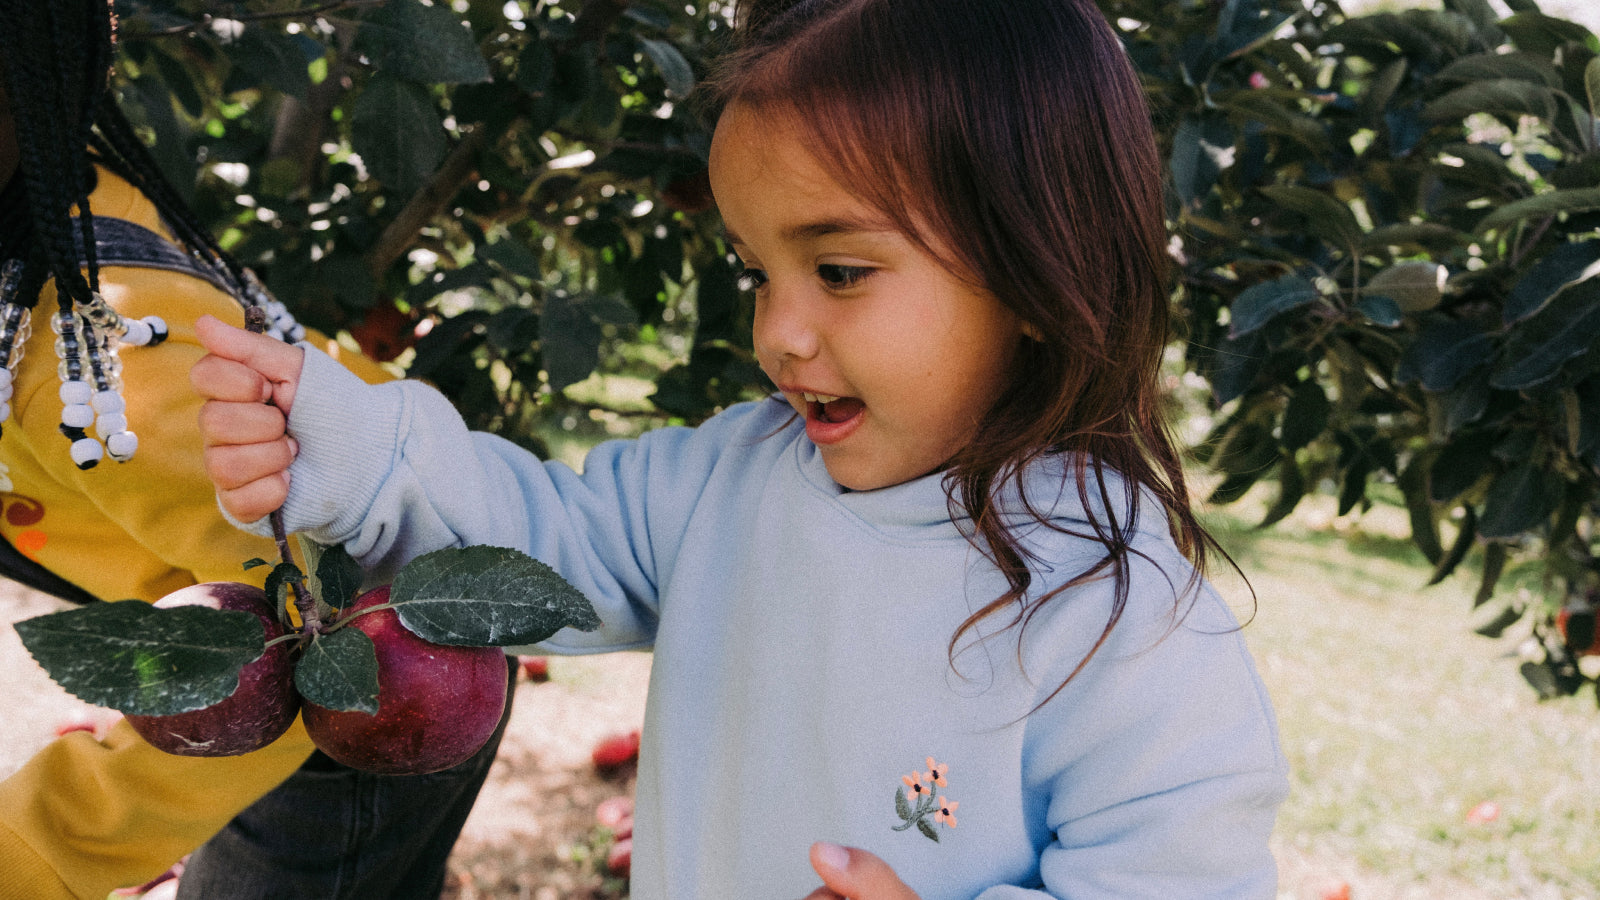 A young girl in a light blue shirt picks red apples off the tree